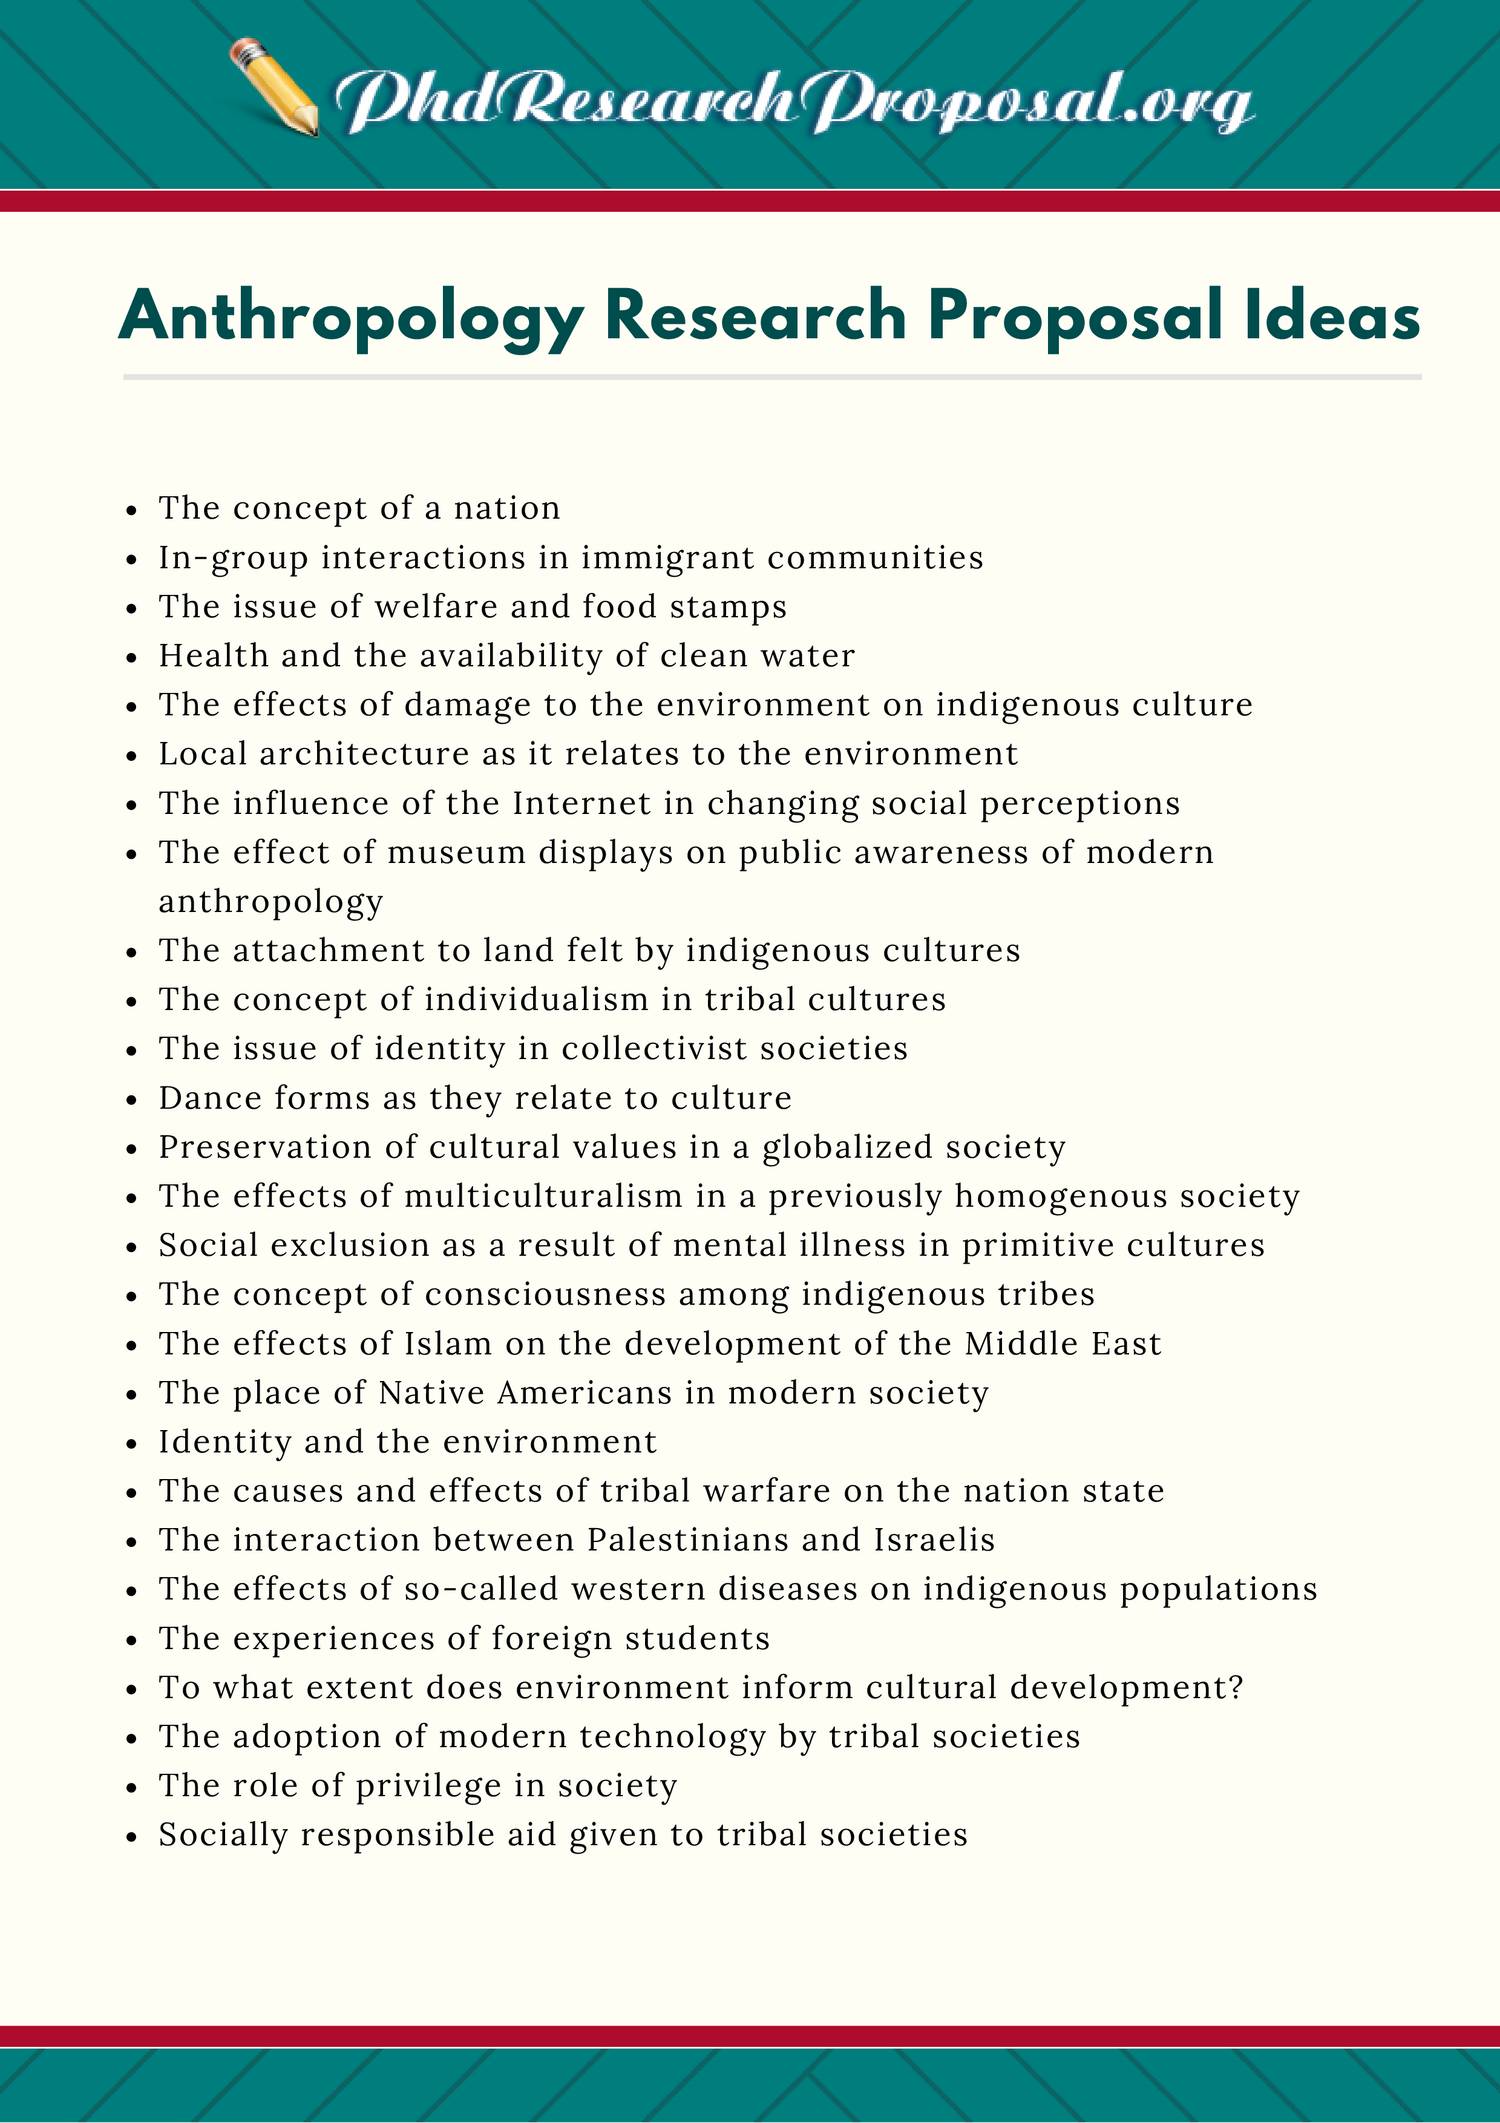 research topics for anthropology